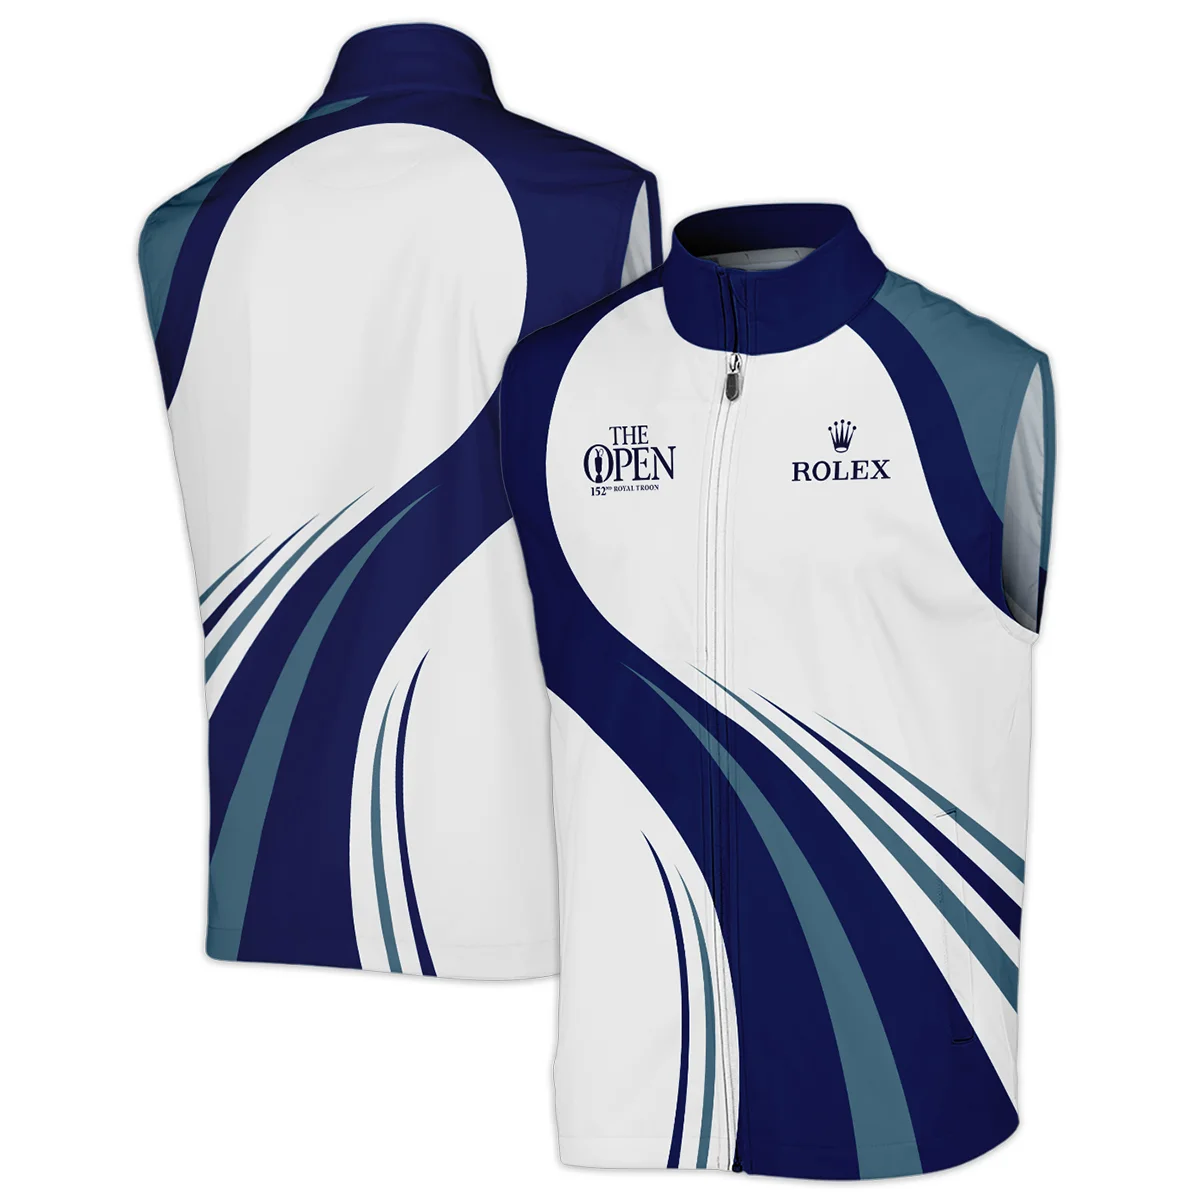 152nd Open Championship Rolex White Mostly Desaturated Dark Blue Sleeveless Jacket All Over Prints HOTOP270624A02ROXSJK